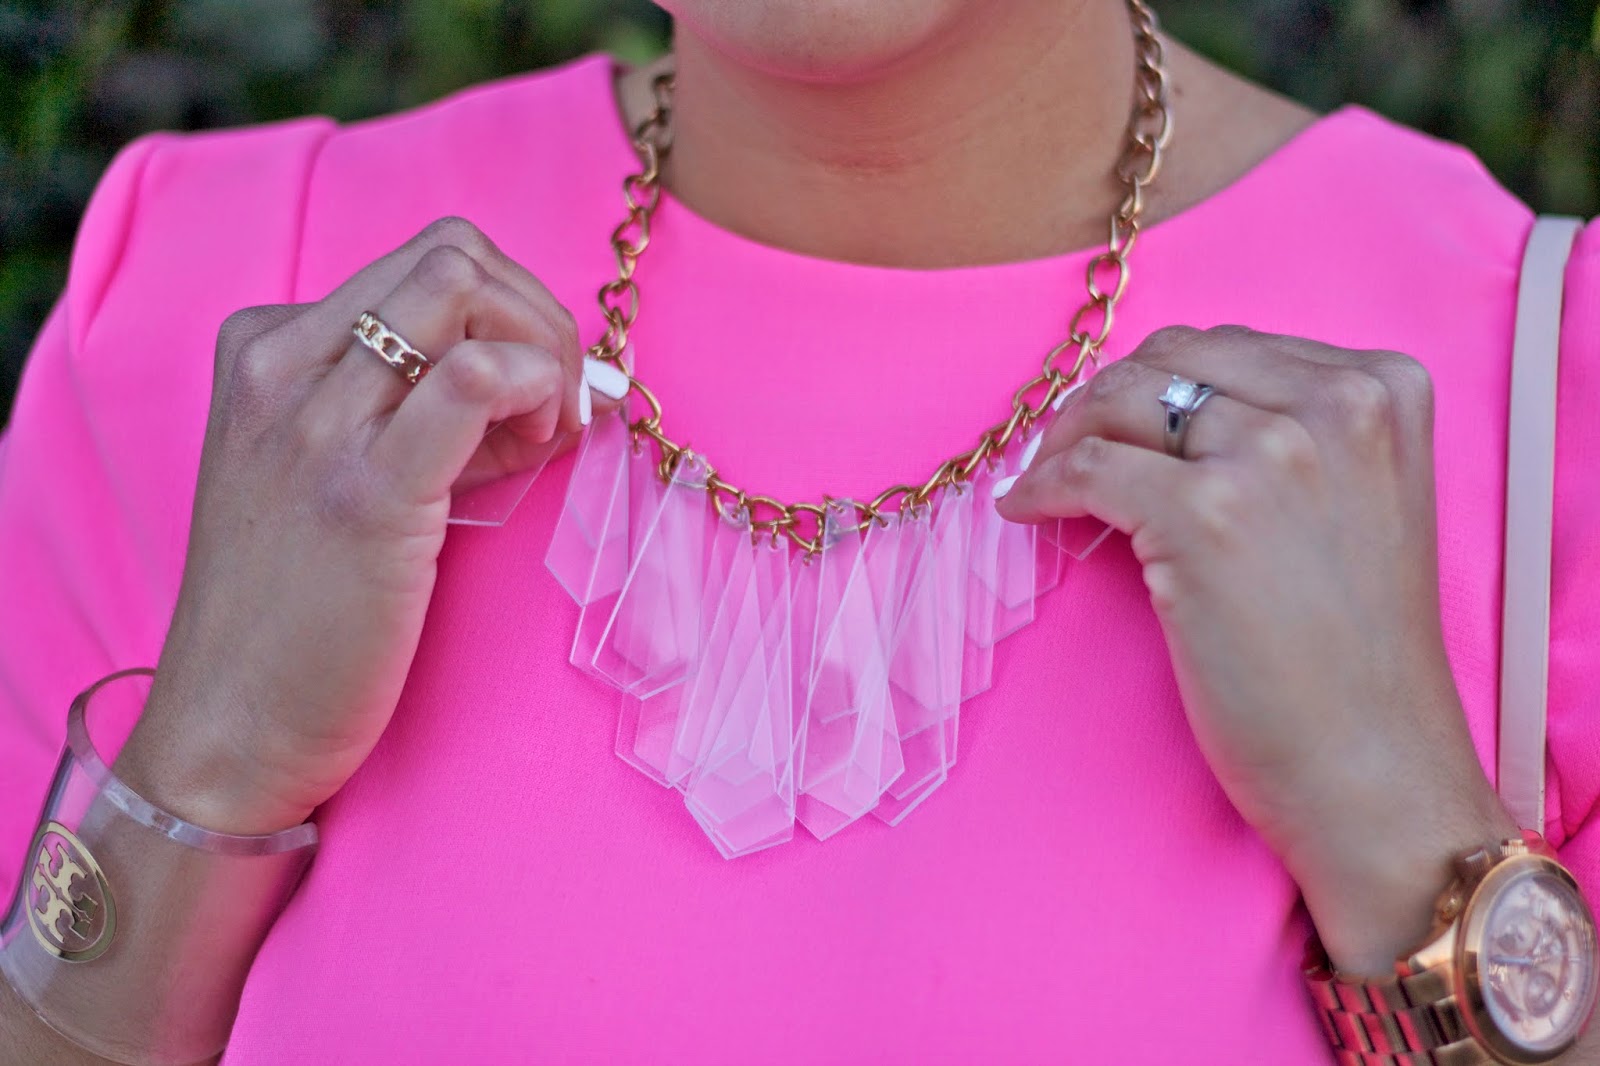 How to wear hot pink, what accessories to wear with hot pink, clear accessories, acrylic accessories, hot pink dress from asos, river island pink dress